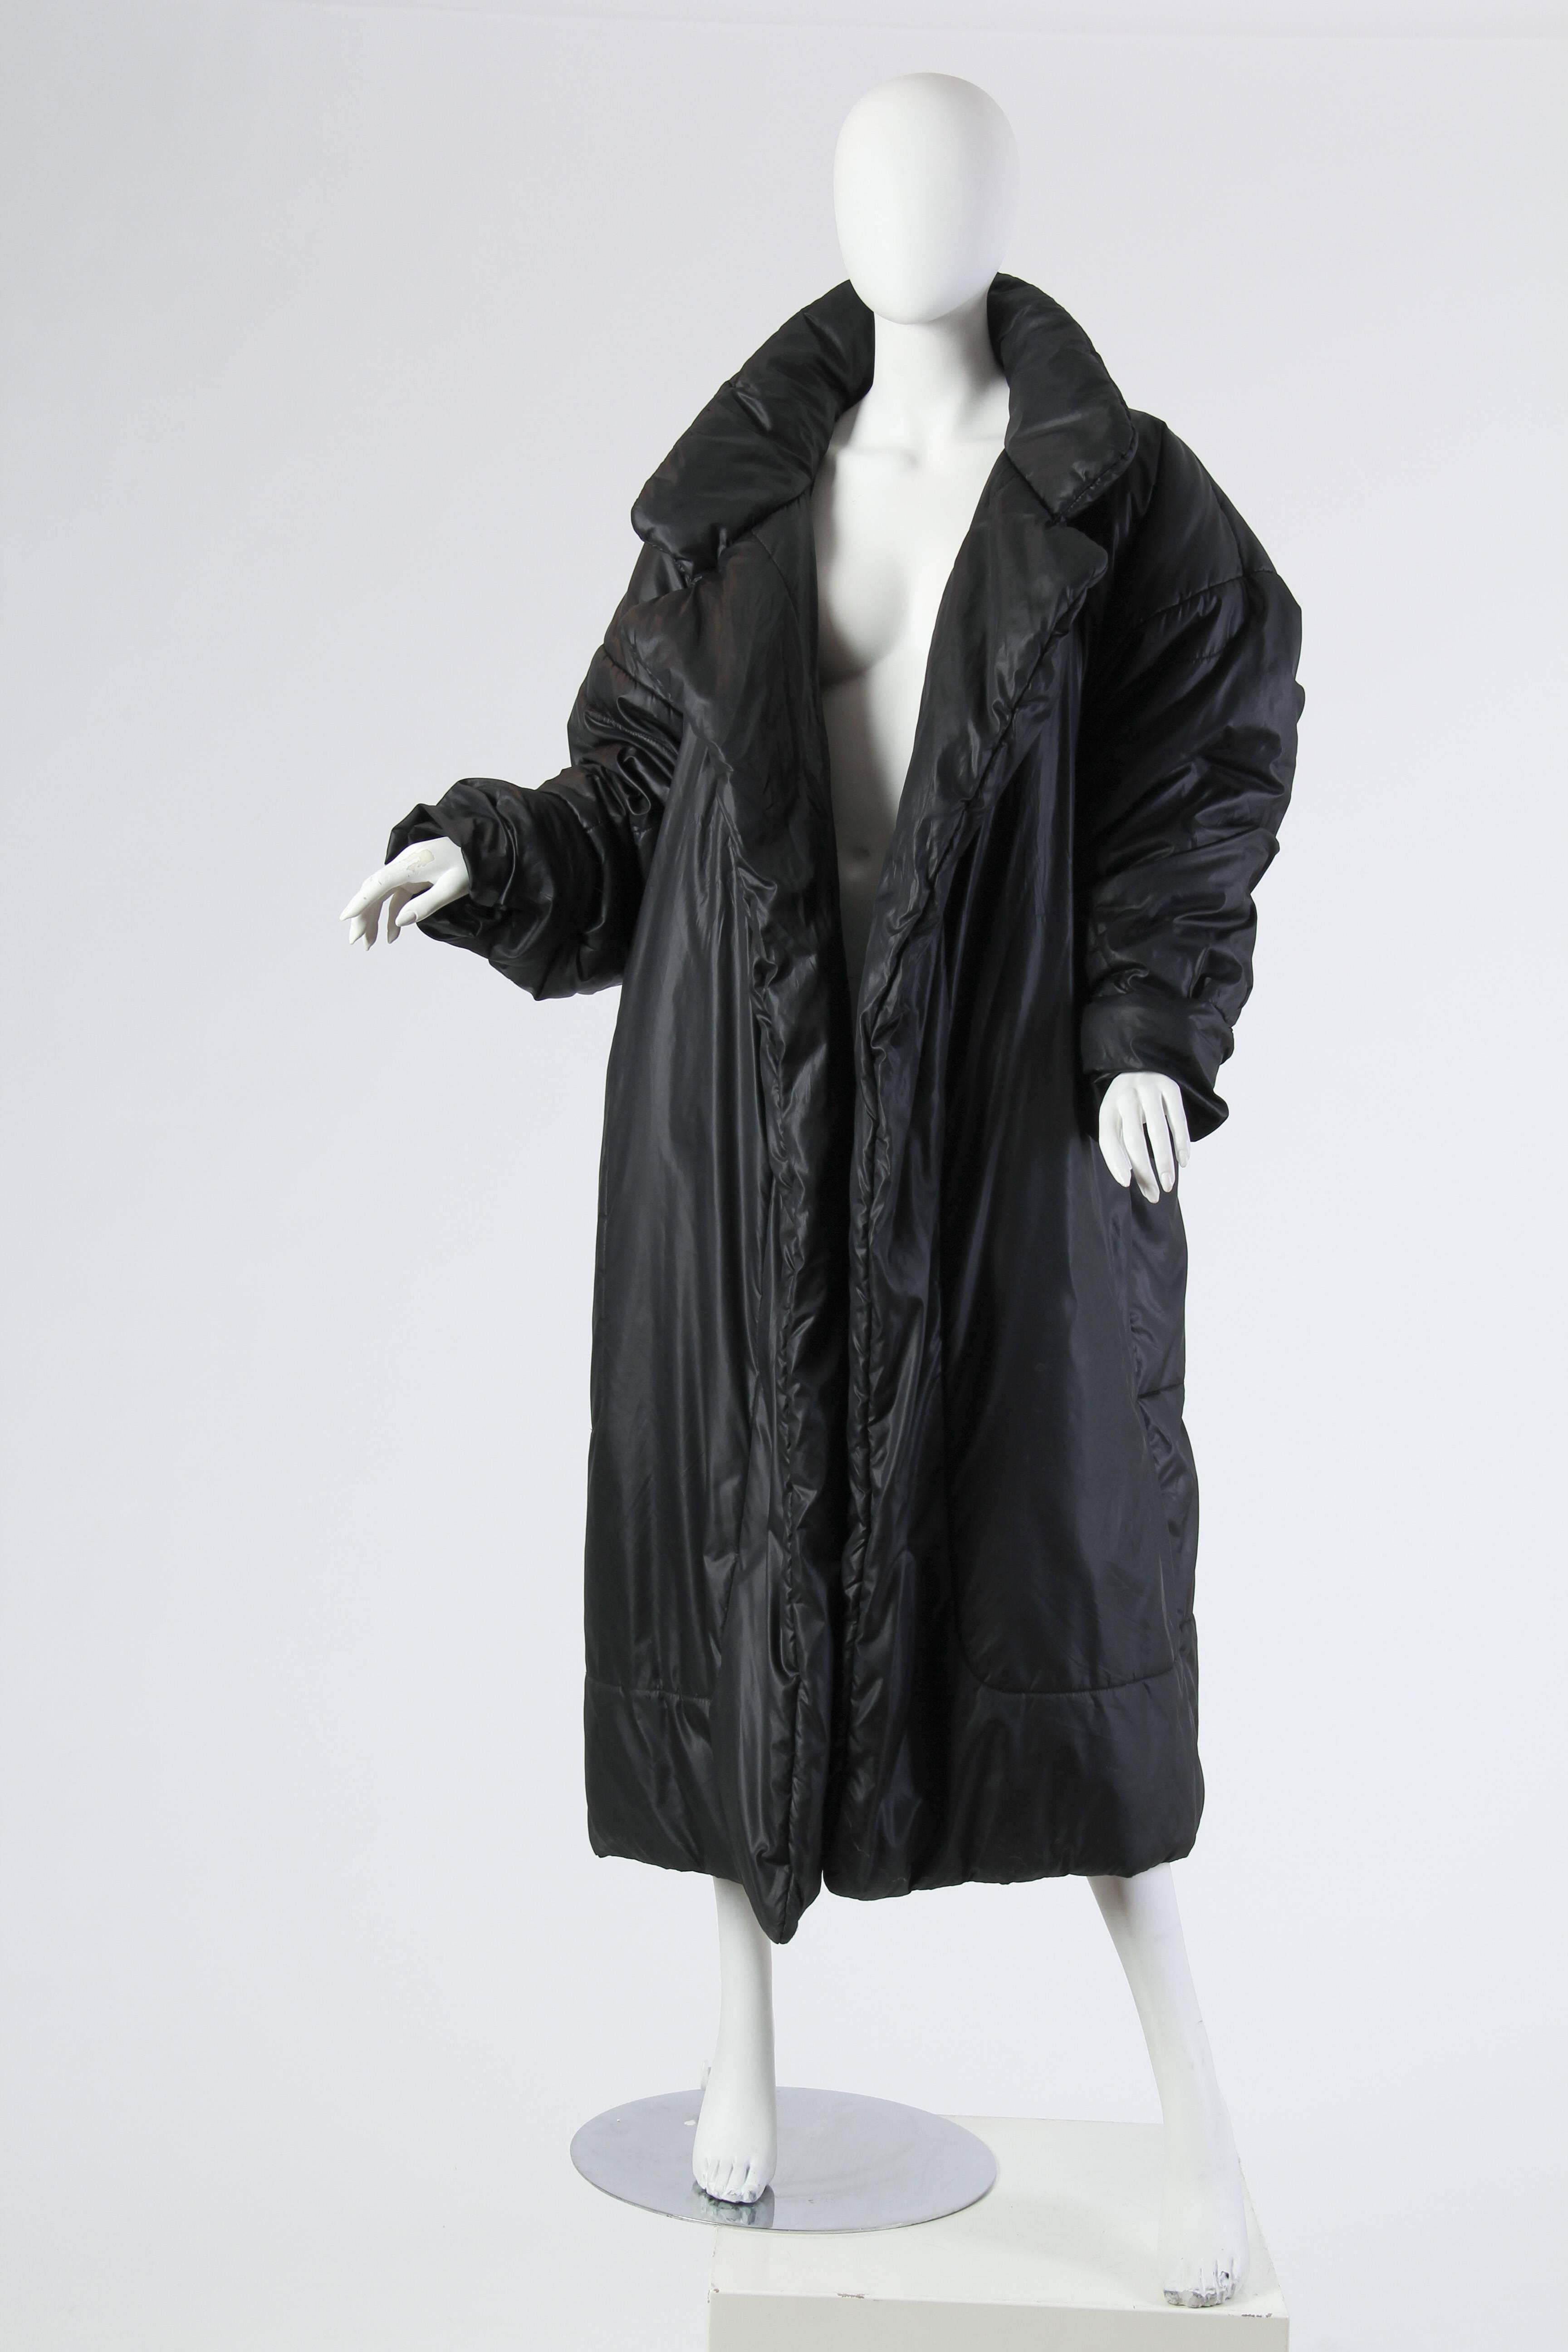 This is a sleeping bag coccoon coat by Omo Norma Kamali. This coat is as warm as warm can get, and turns its weather-appropriate bulk into clever and sophisticated styling. The coat's hem is detailed with curved border seams, drawing the eye down